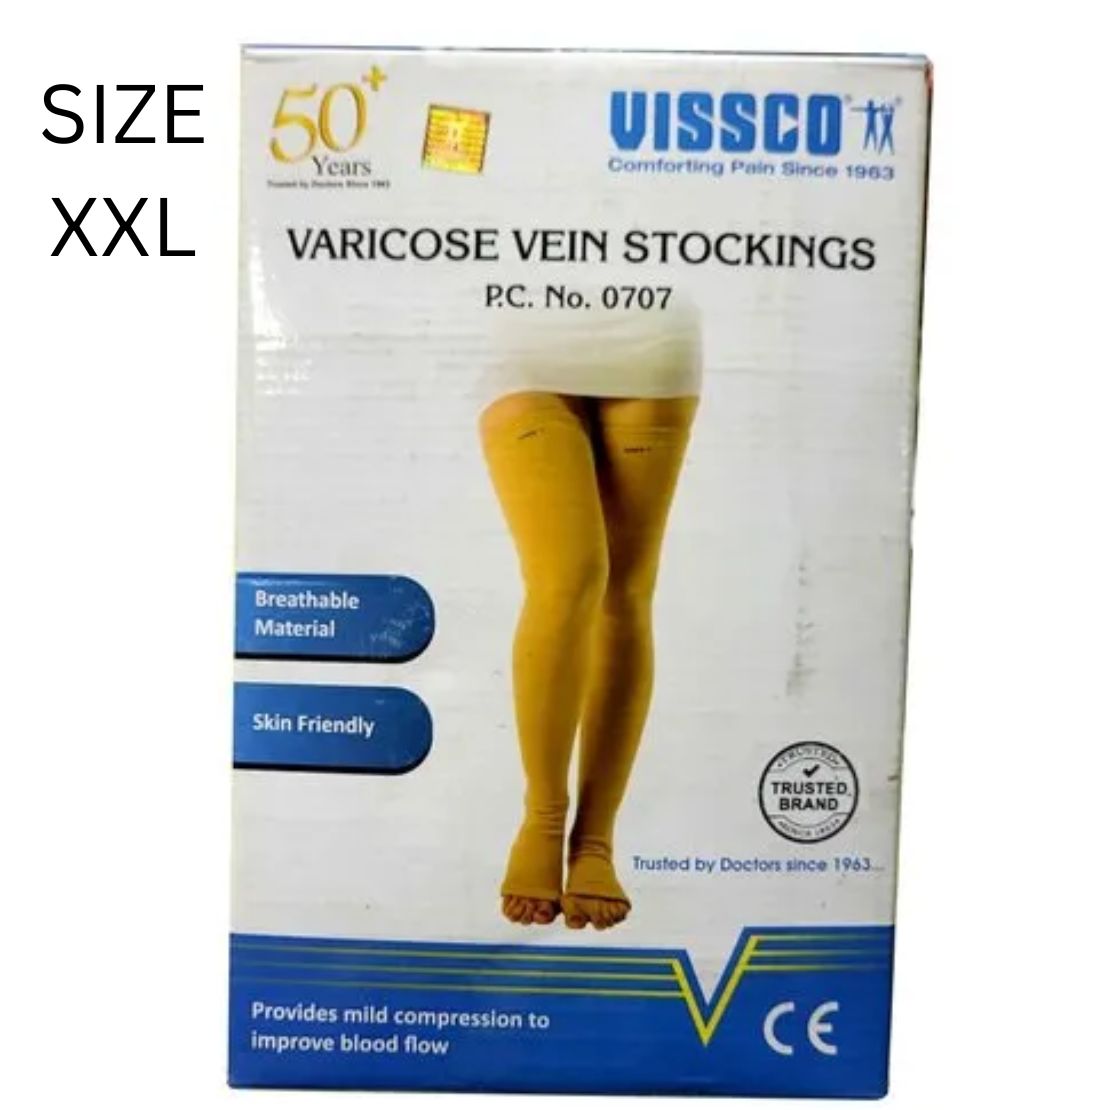 Vissco Varicose Vein Stockings Provides Leg Compression to Improve Blood Circulation & Relieves Pain.